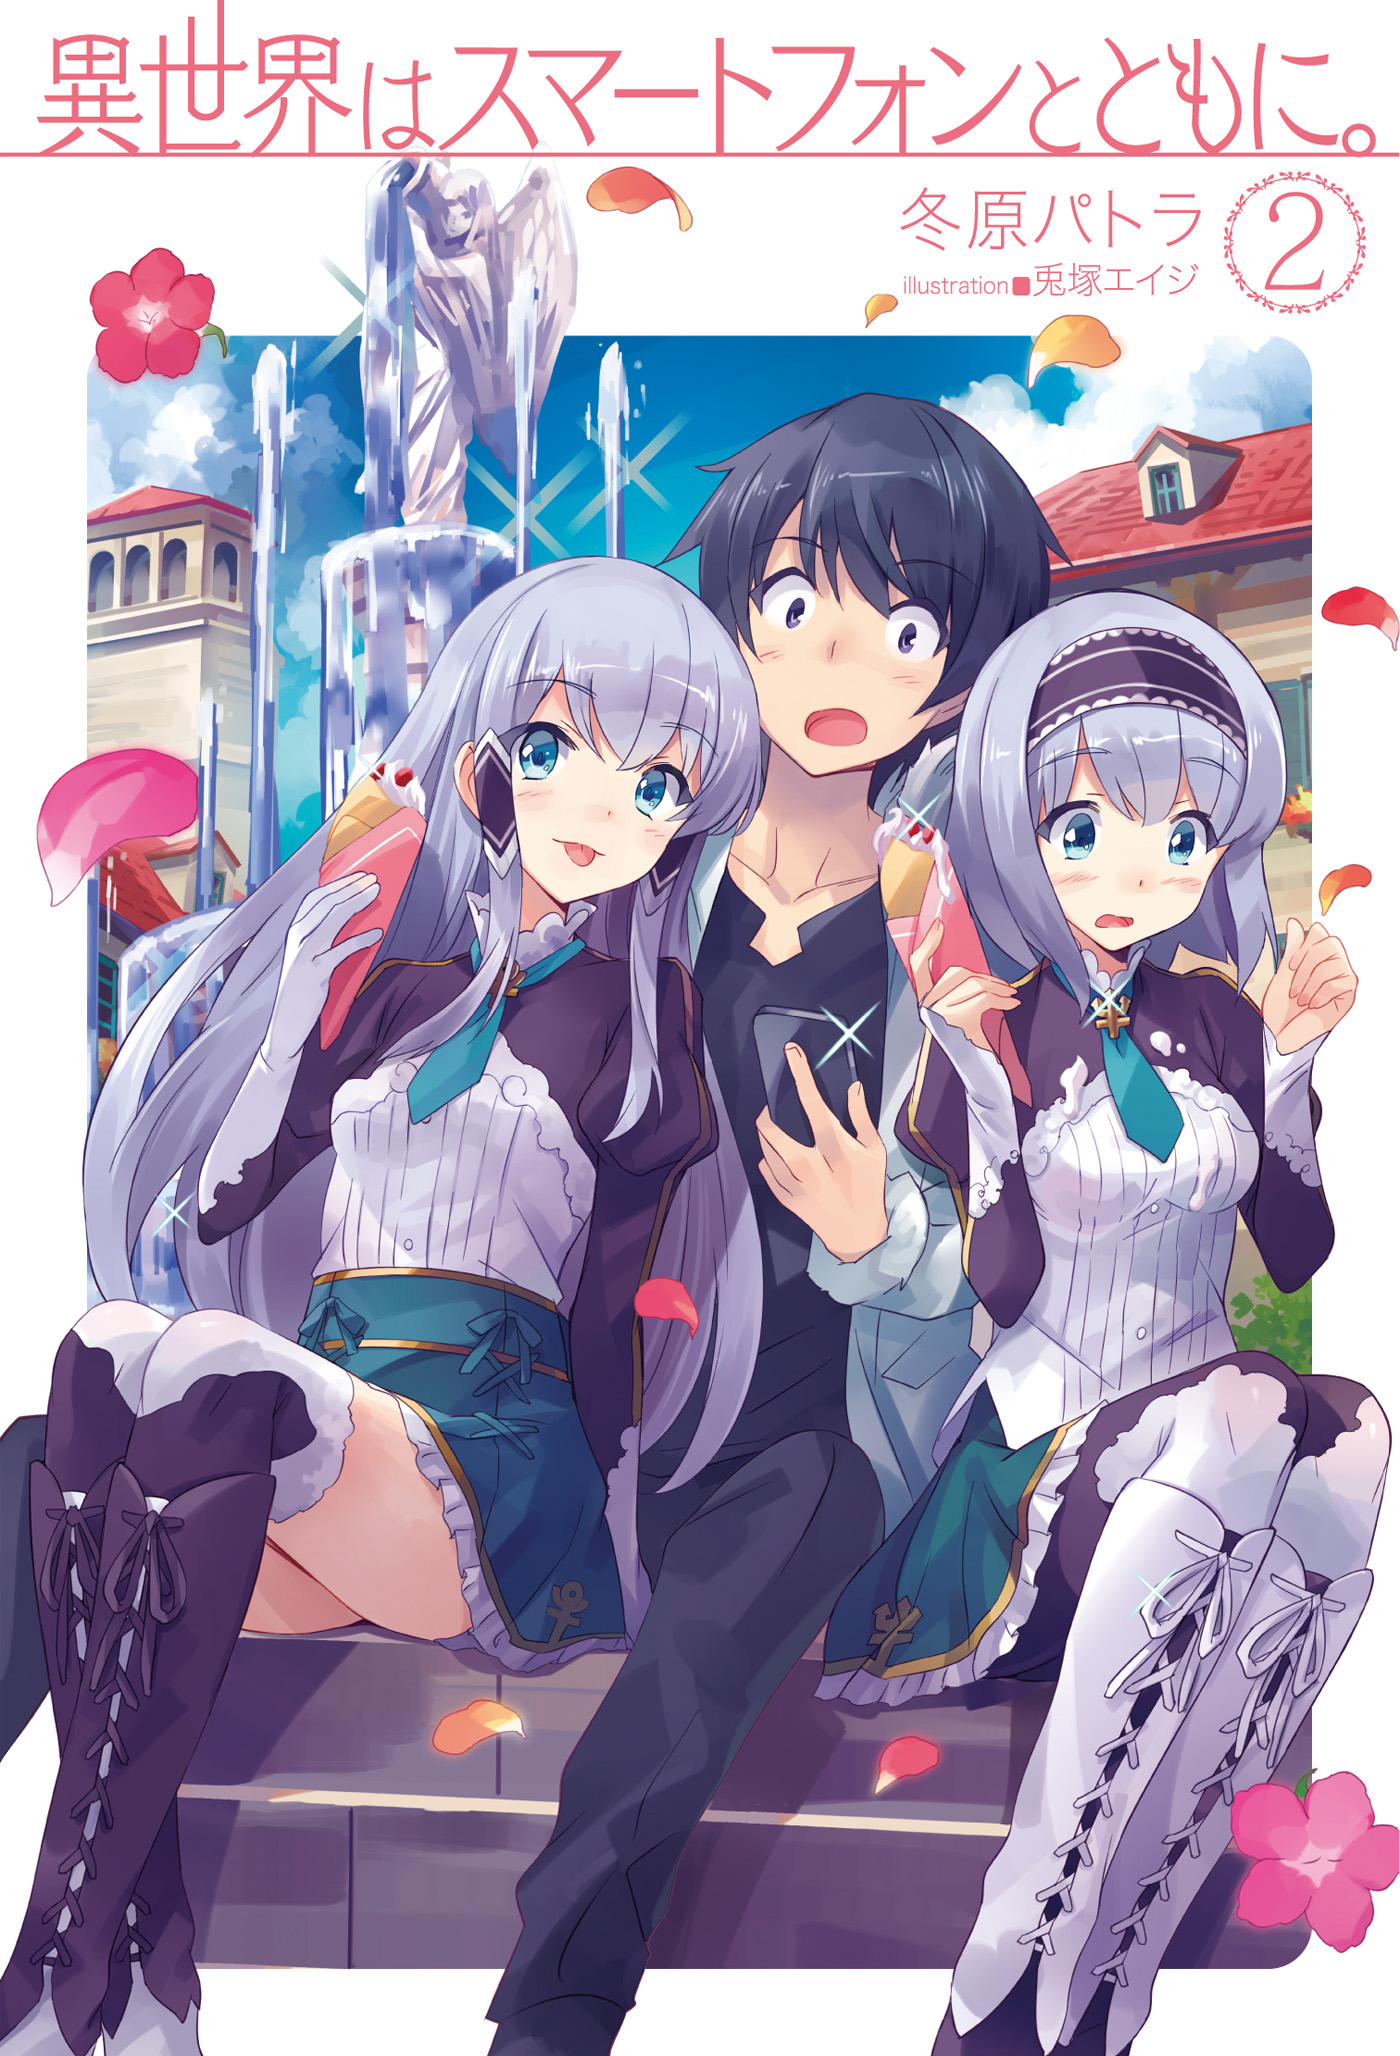 Light Novel Volume 2 | In Another World With My Smartphone Wiki | Fandom